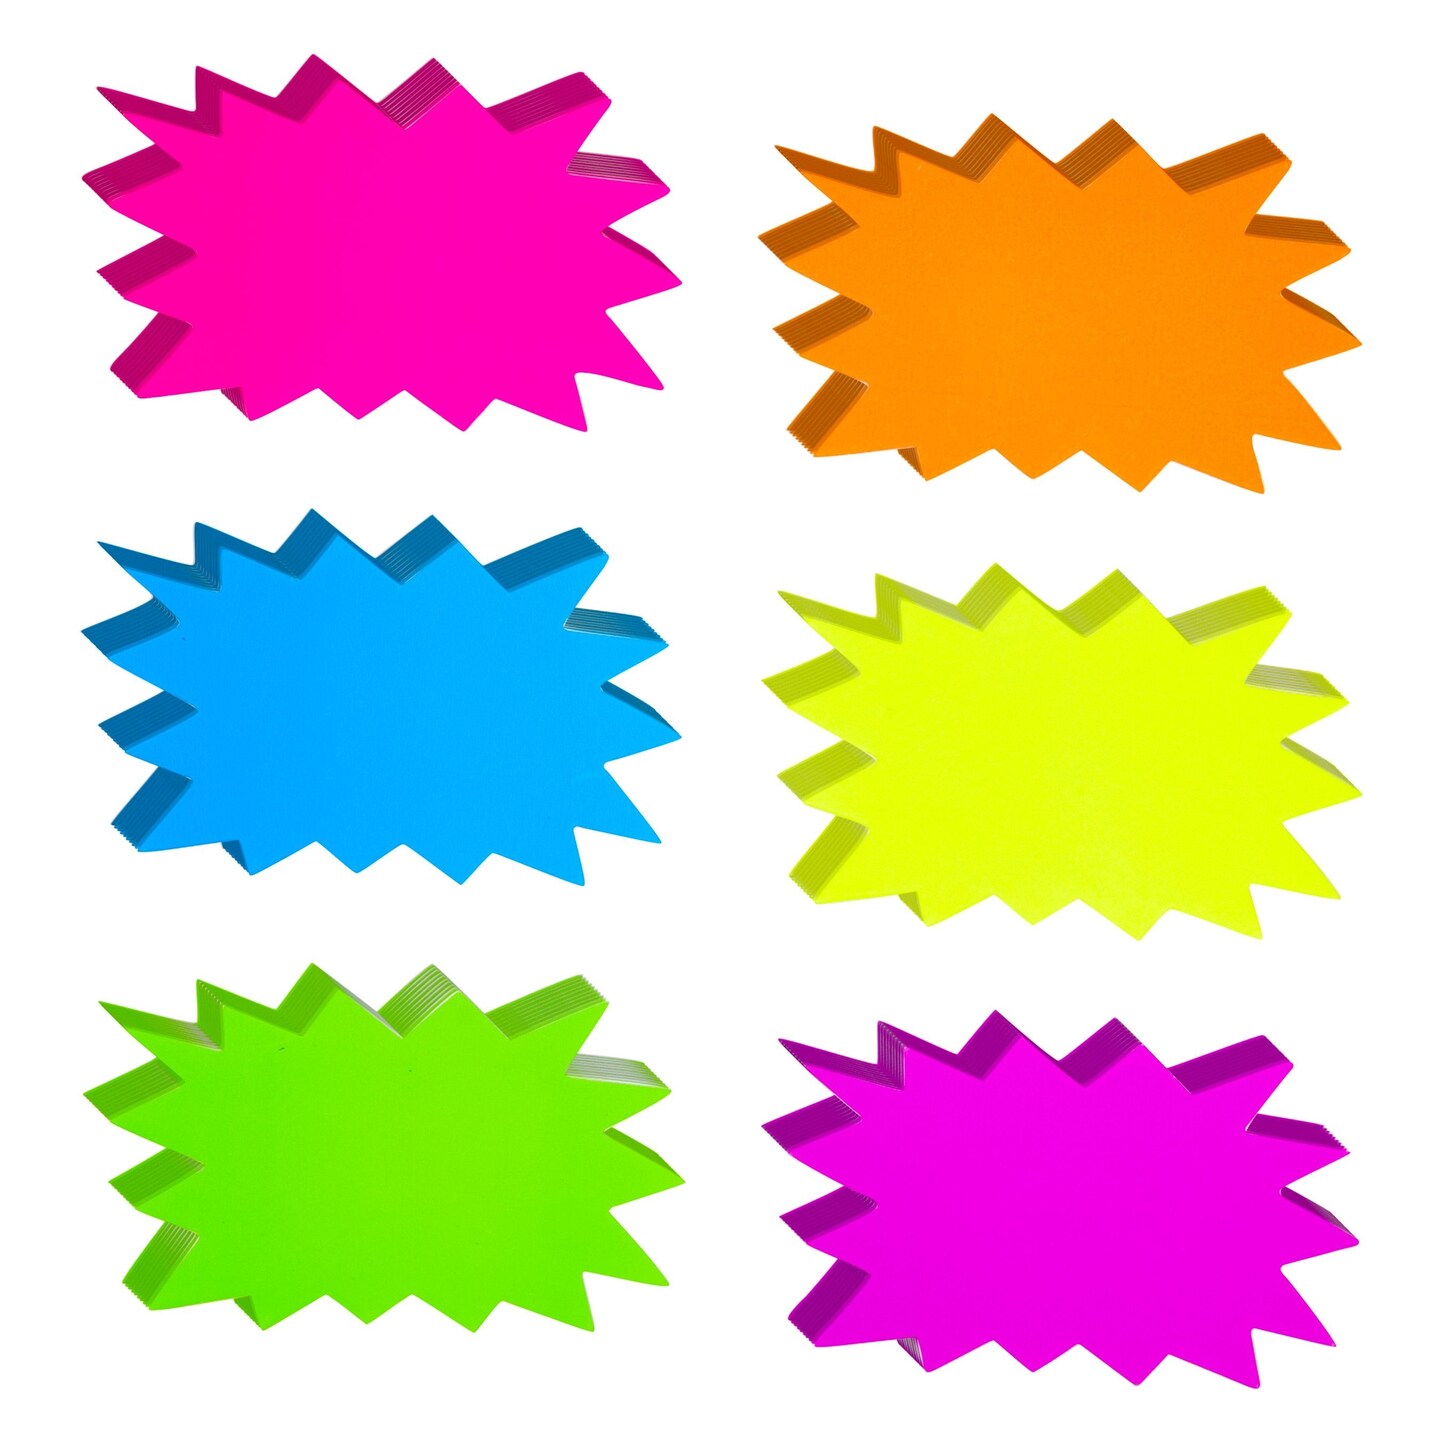 60 Pack Neon Starburst Sale Signs for Retail Store Display, Price Tag, Bulletin Board Cutouts for Classroom Supplies (6 Colors, 3 x 5 In)